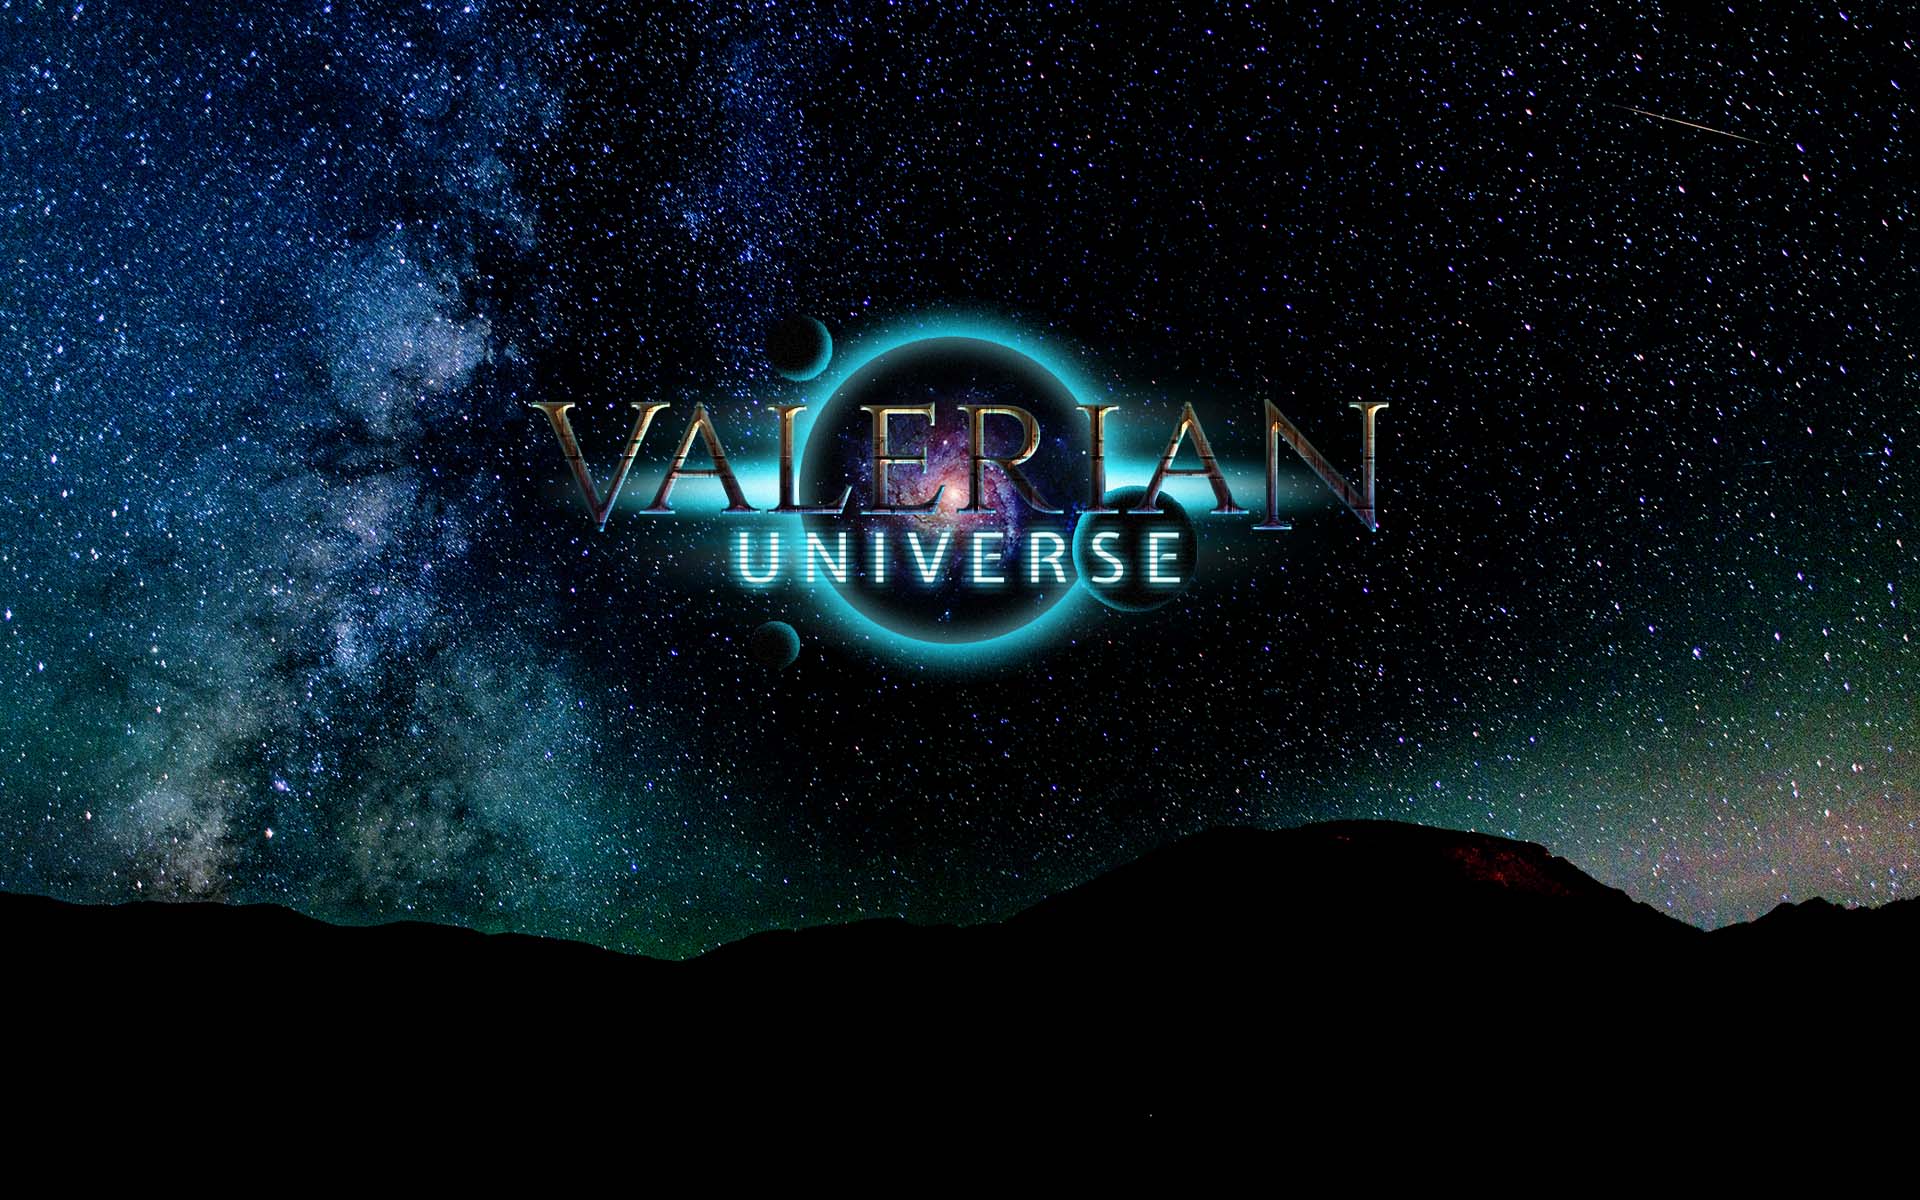 Bitcoin Fueled MMO Space Strategy Game Valerian Universe Introduces New Content and Updates